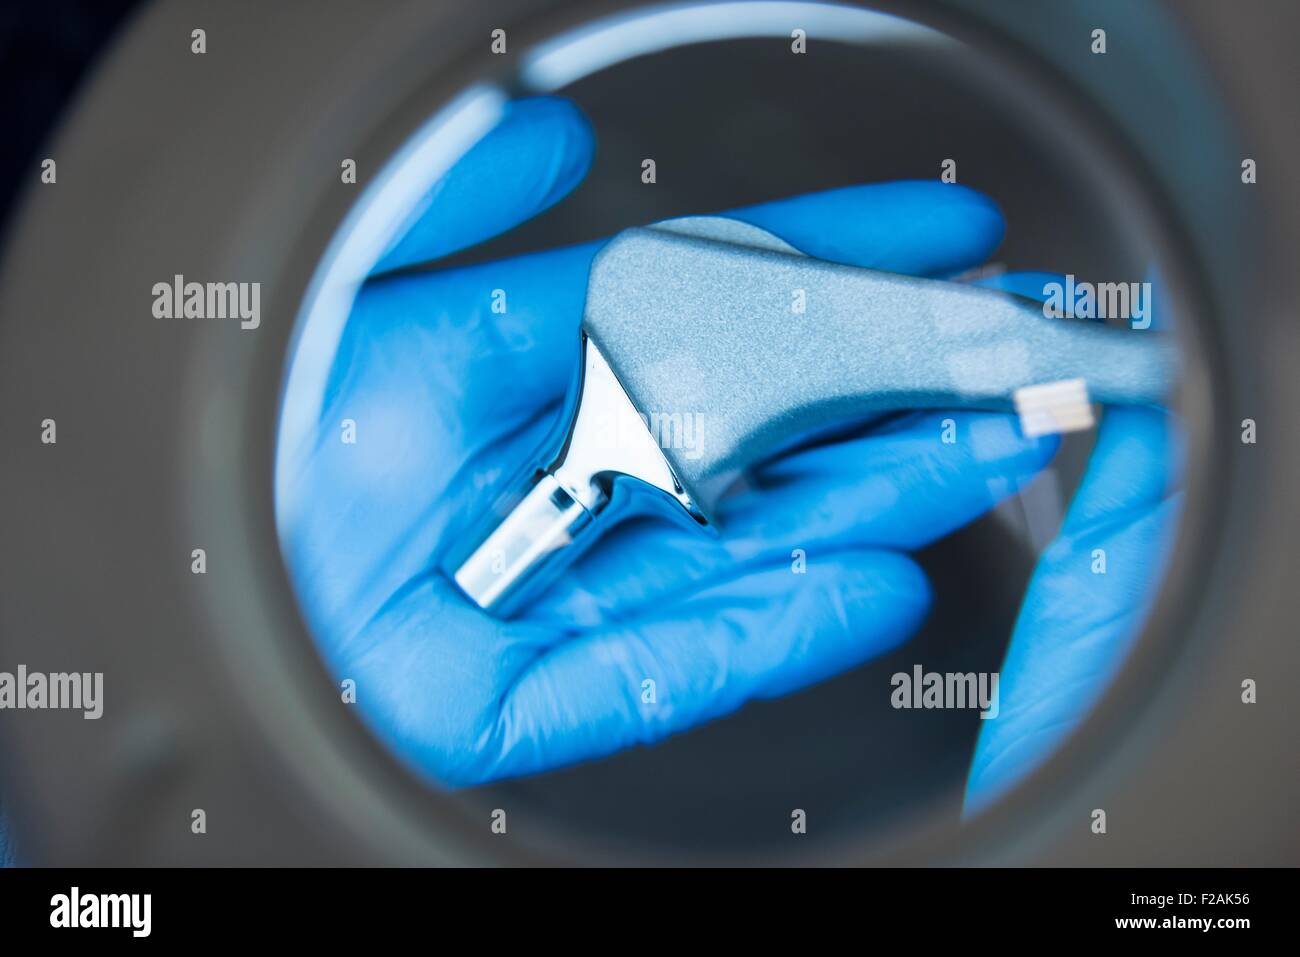 Engineer inspecting artificial hip joint through magnifier in orthopaedic factory, close up Stock Photo